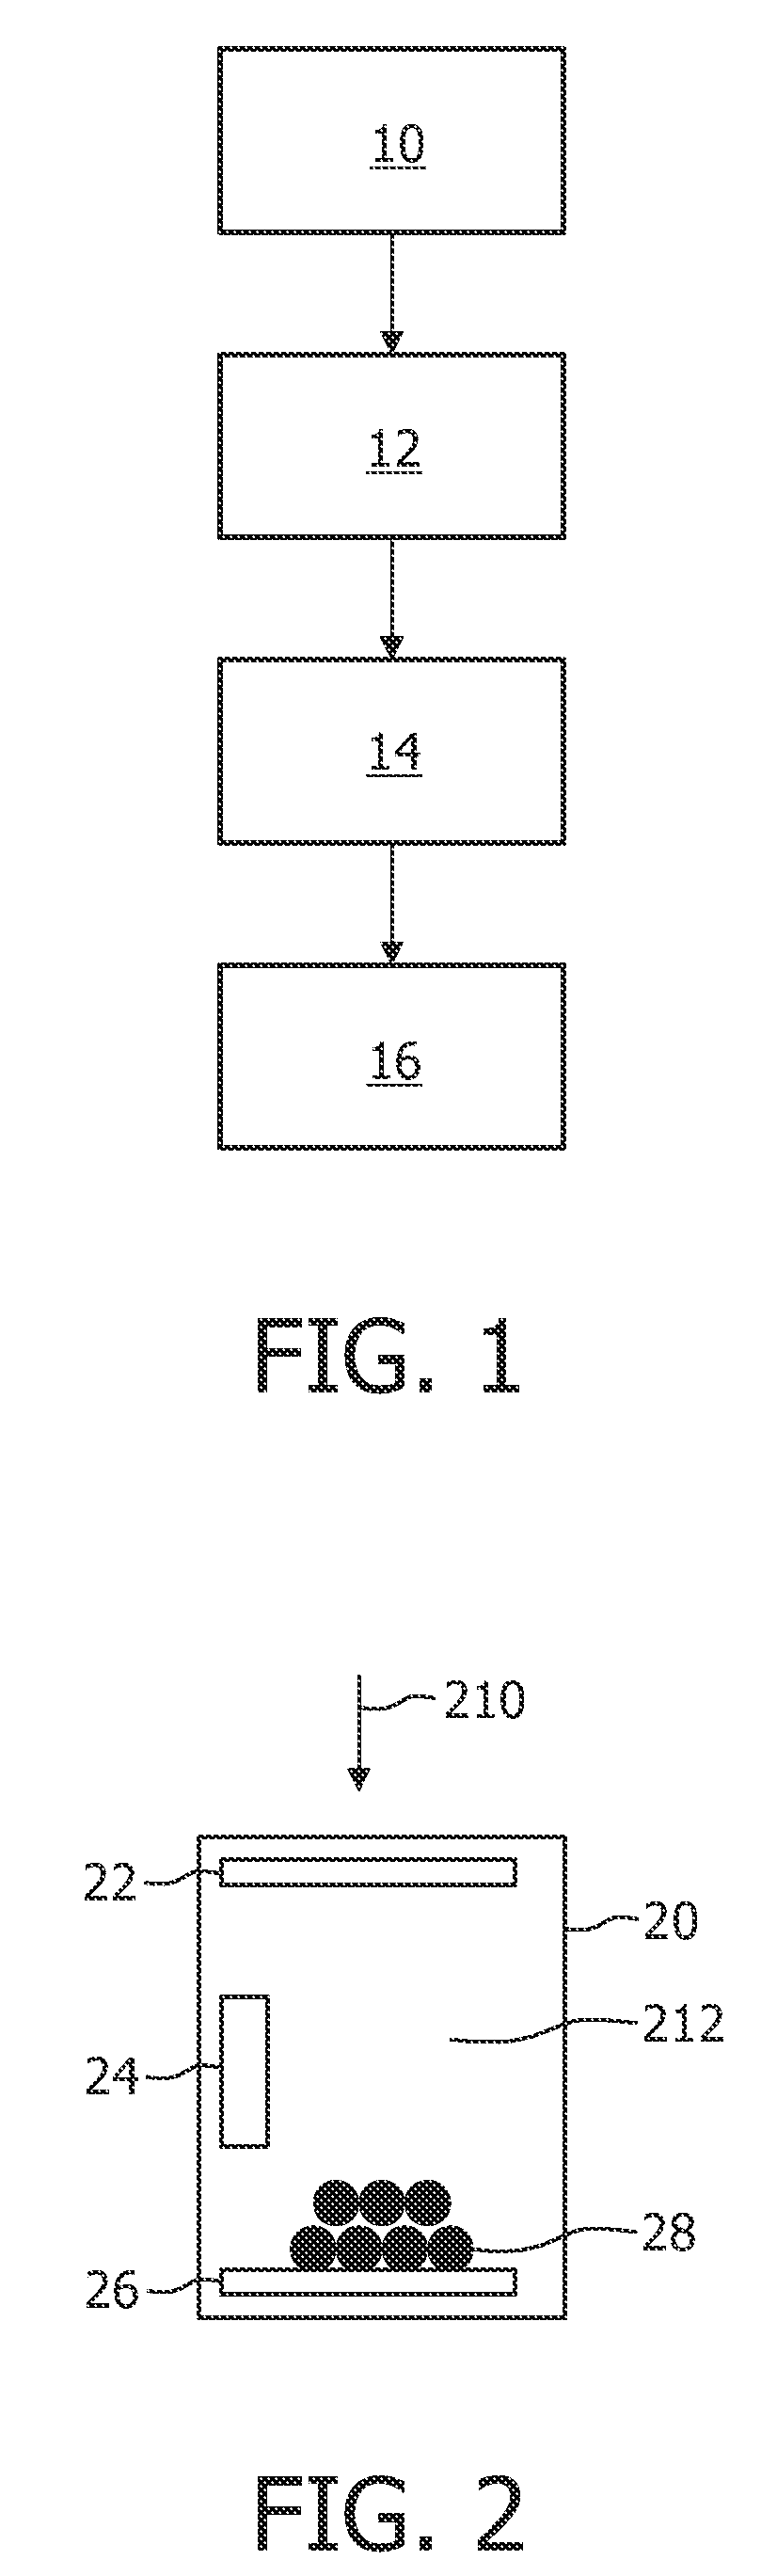 Moving particle display device